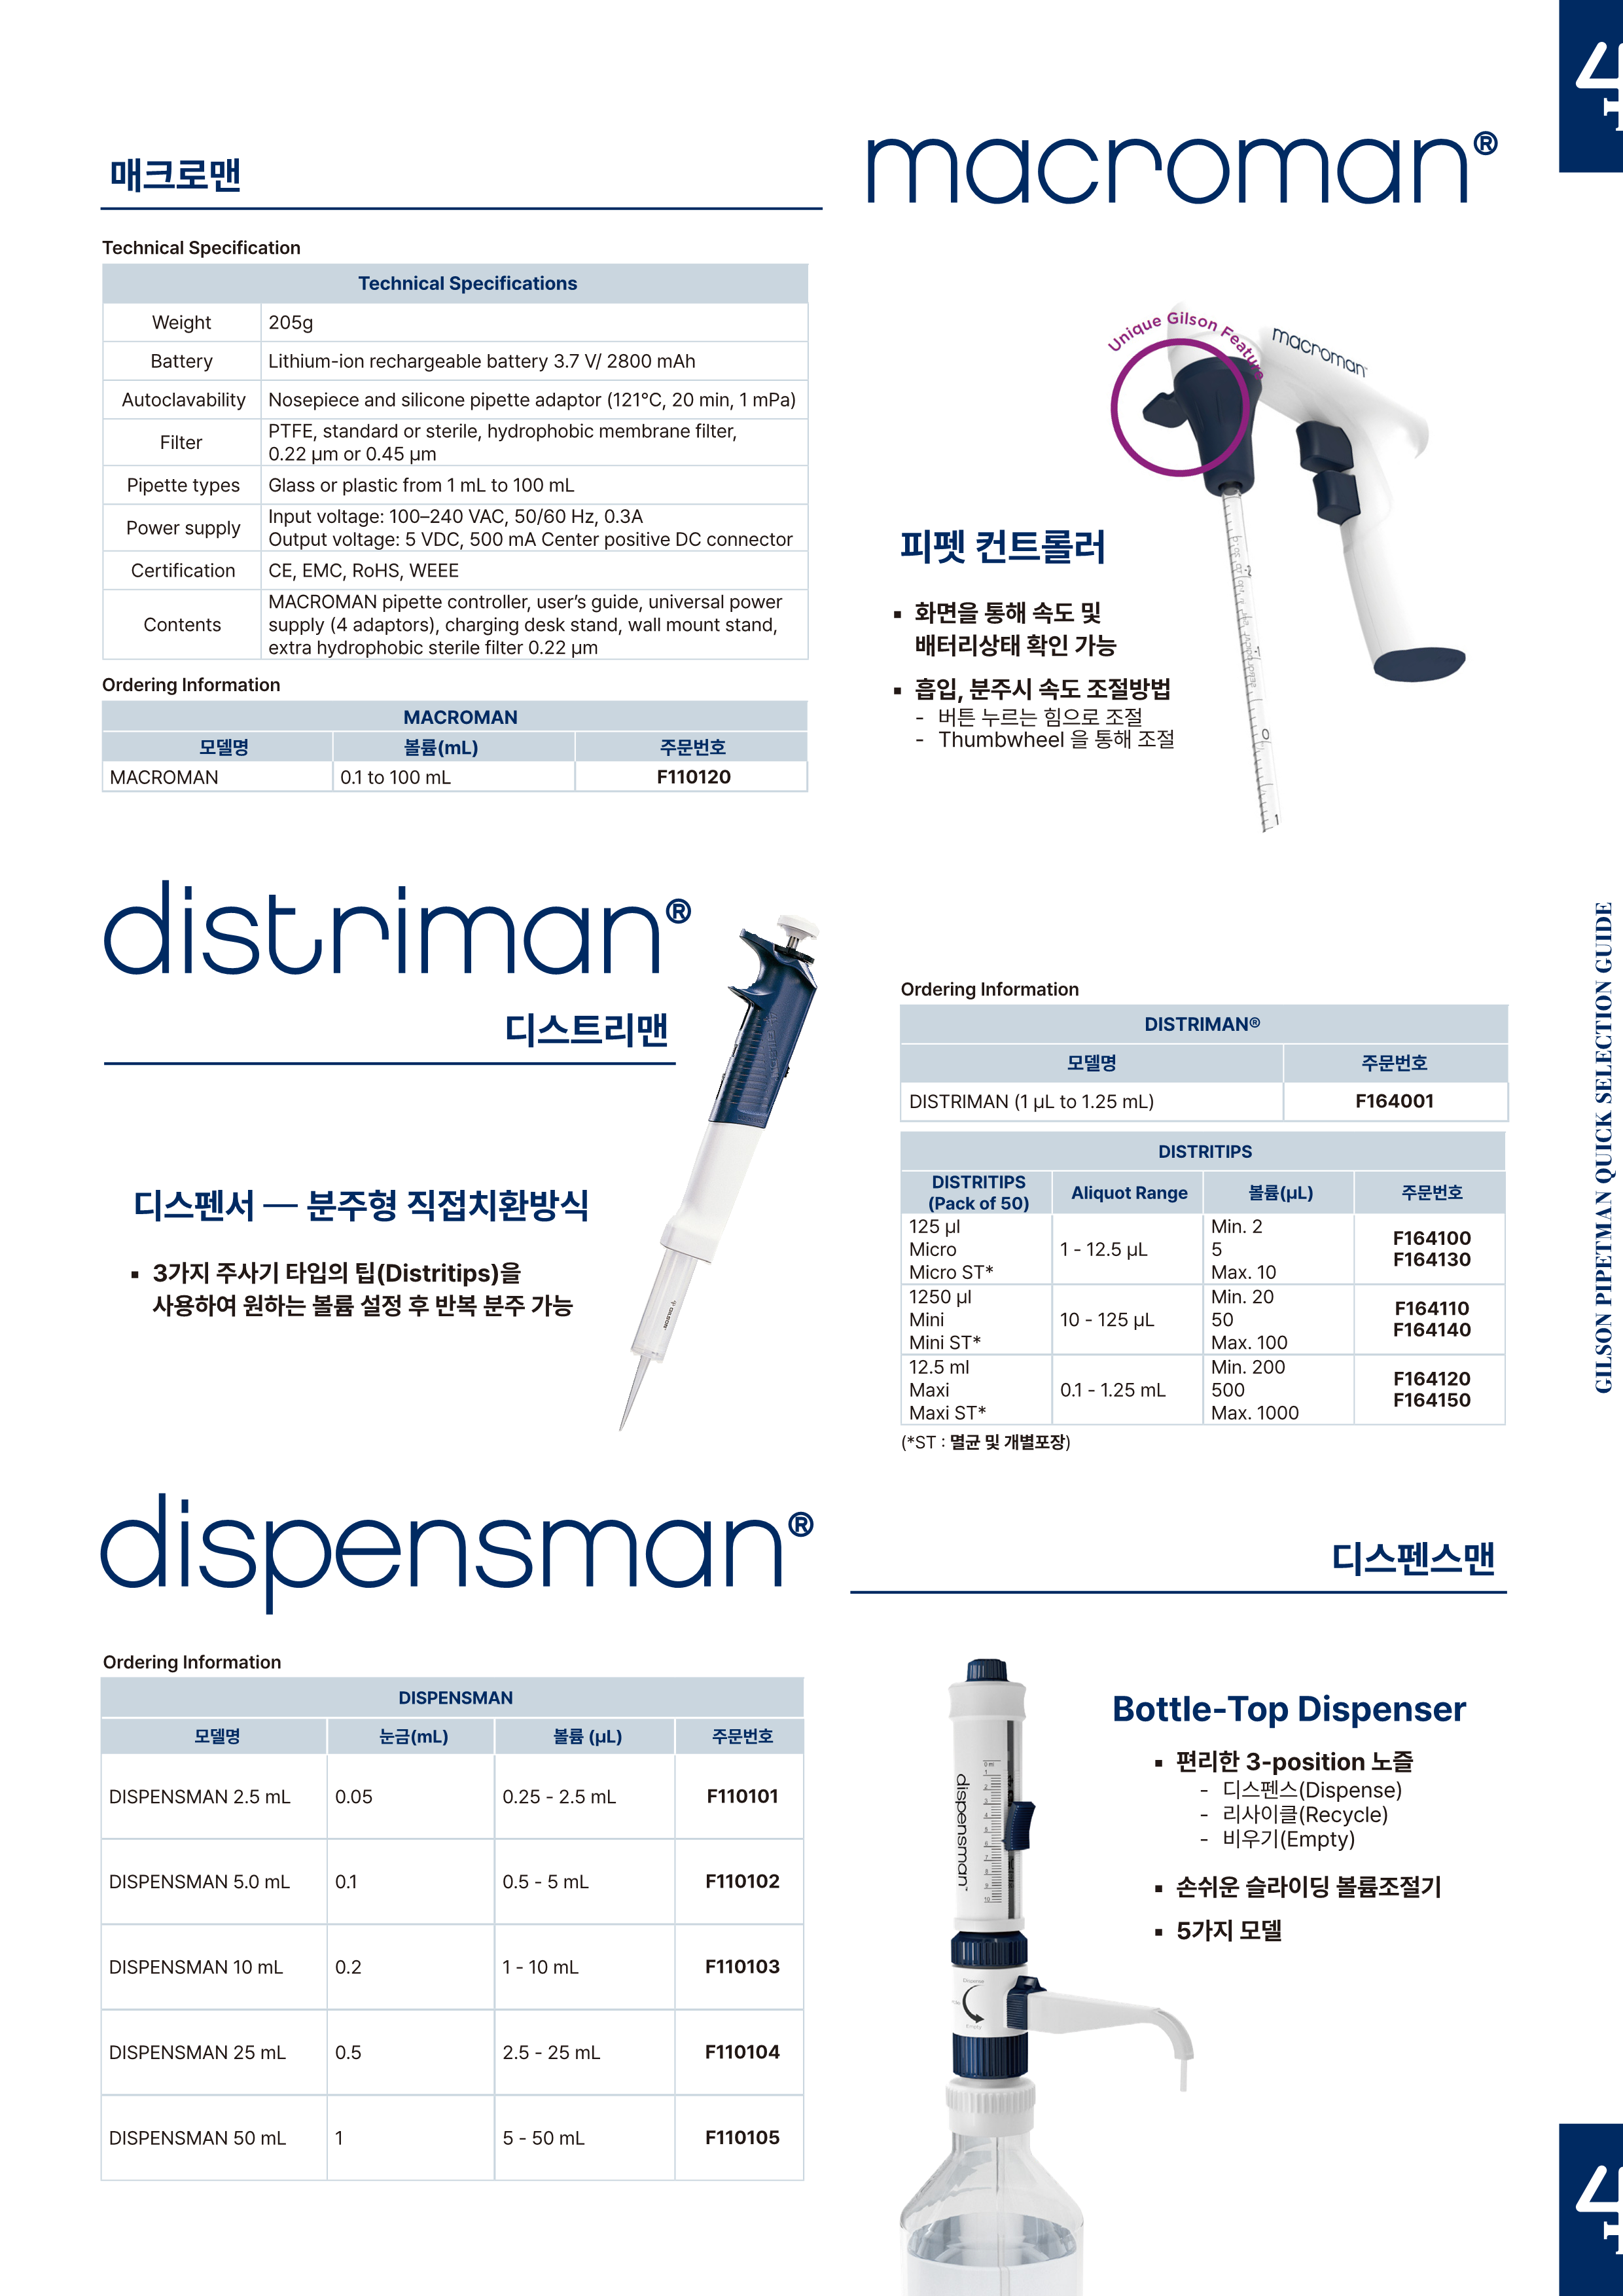 Gilson Pipetman Quick Selection Guide_5.png